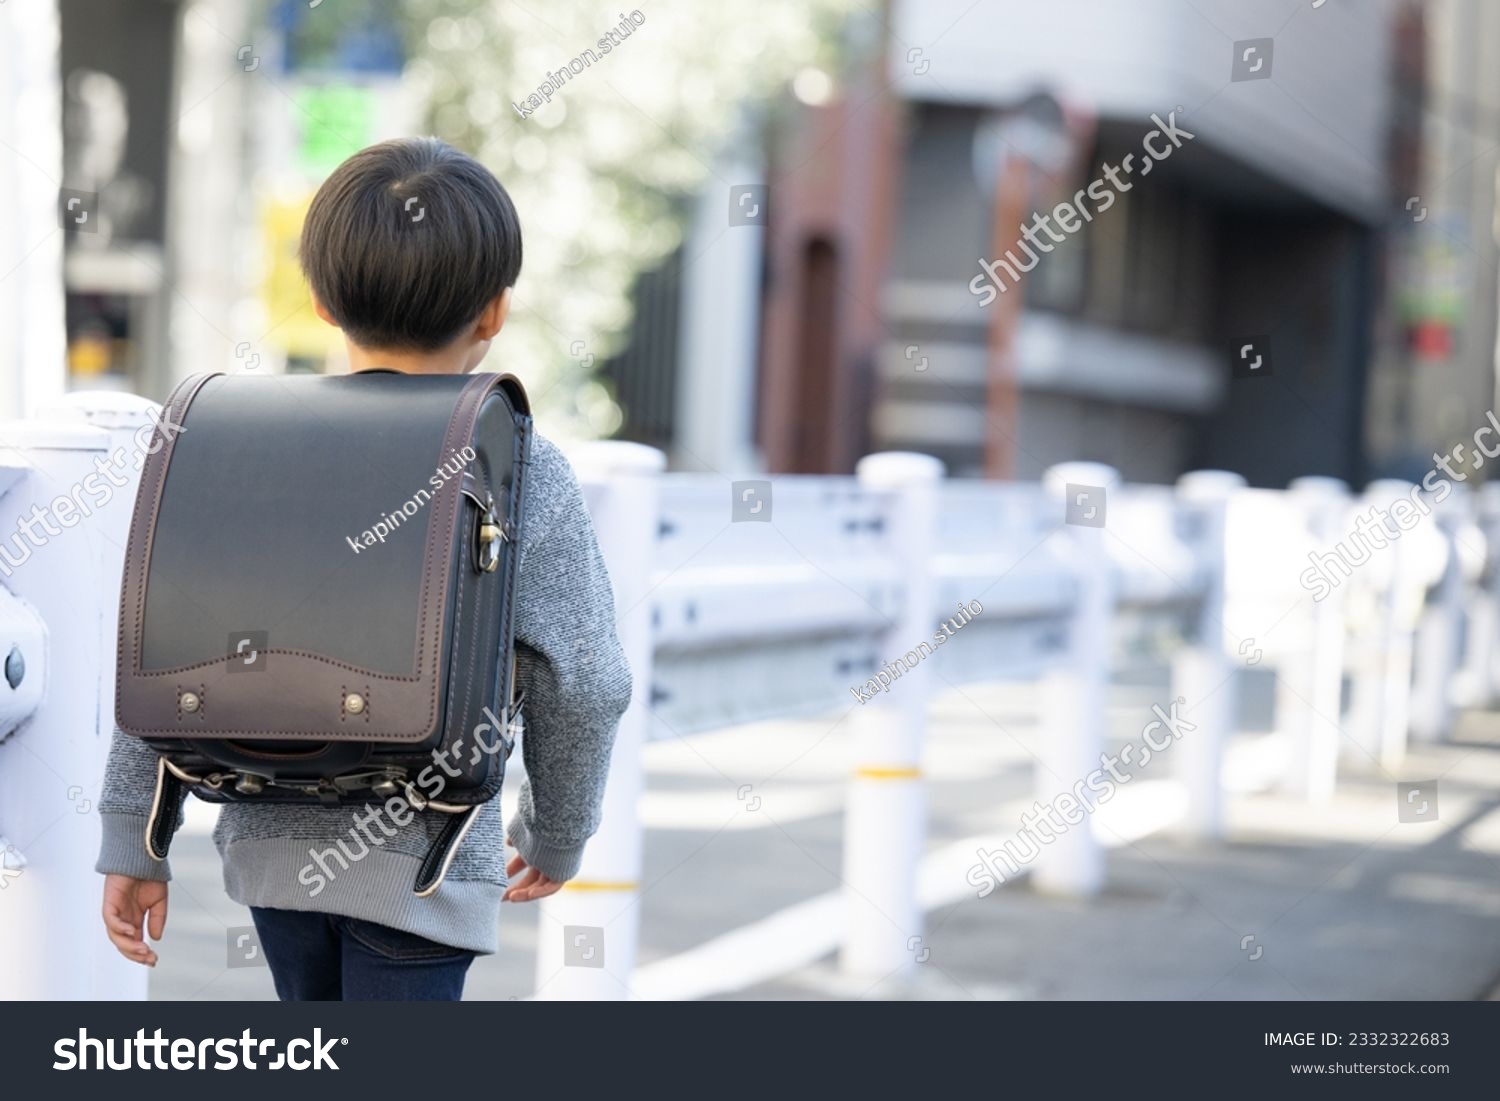 Japanese elementary school students going to and from school alone in urban areas #2332322683